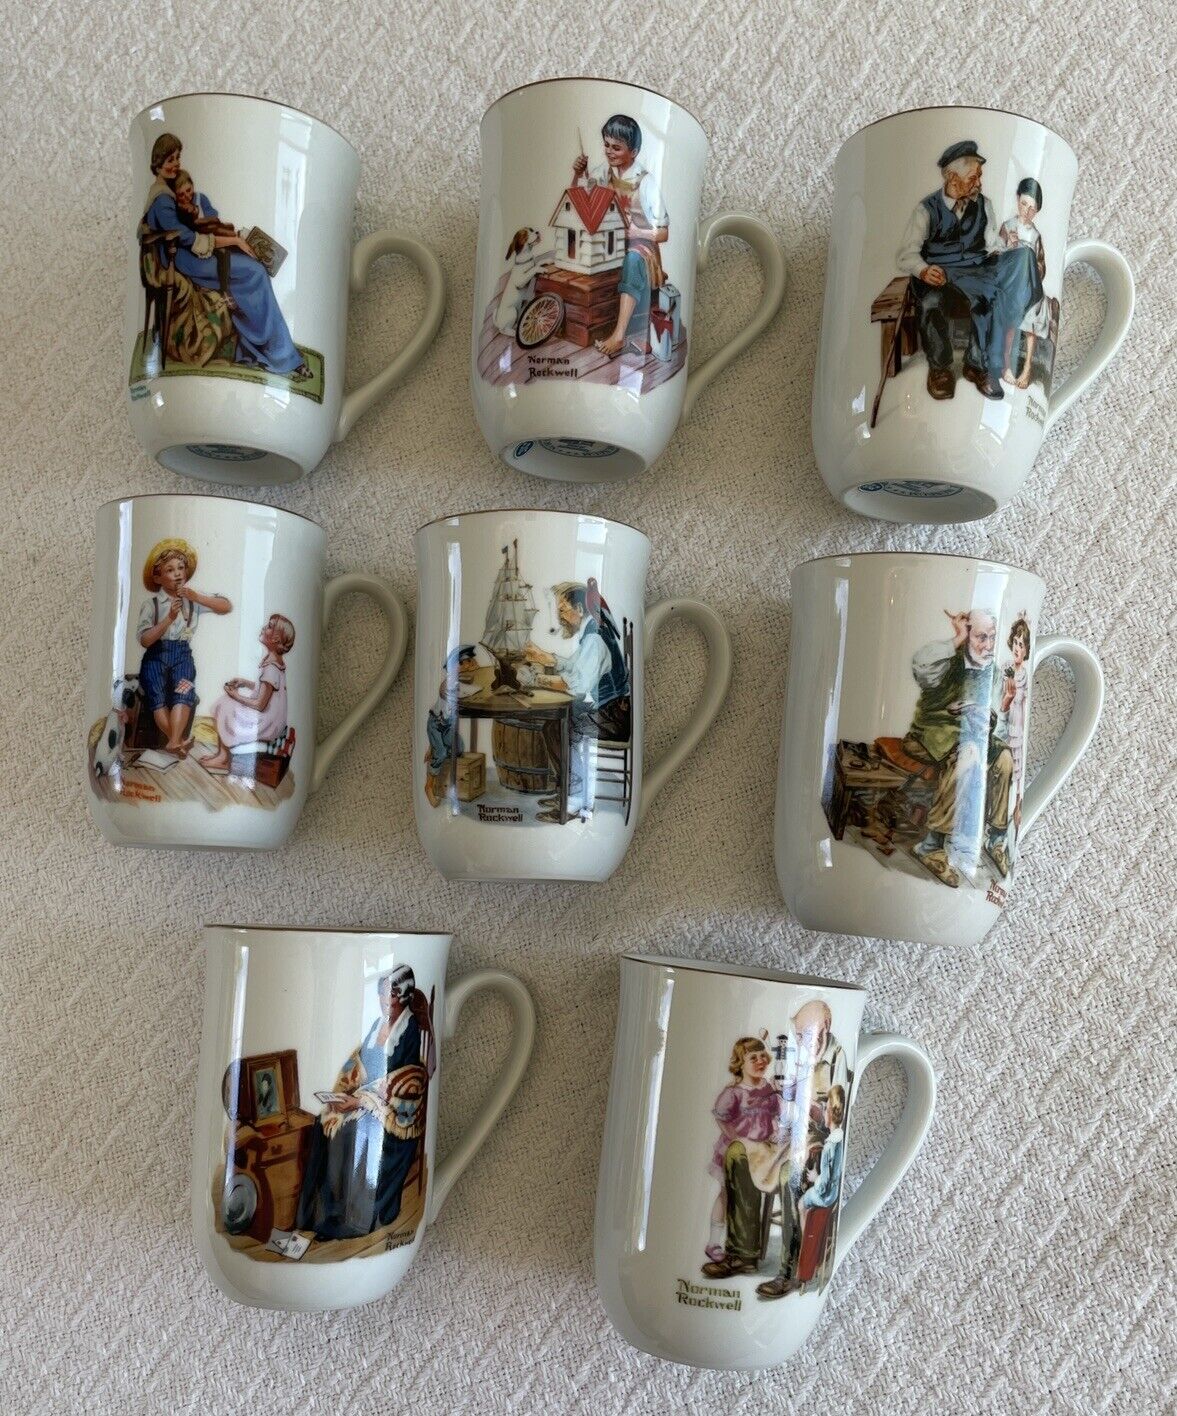 VINTAGE SET Of 8 Norman Rockwell Museum Coffee Mugs Cups White Gold Trim 1982